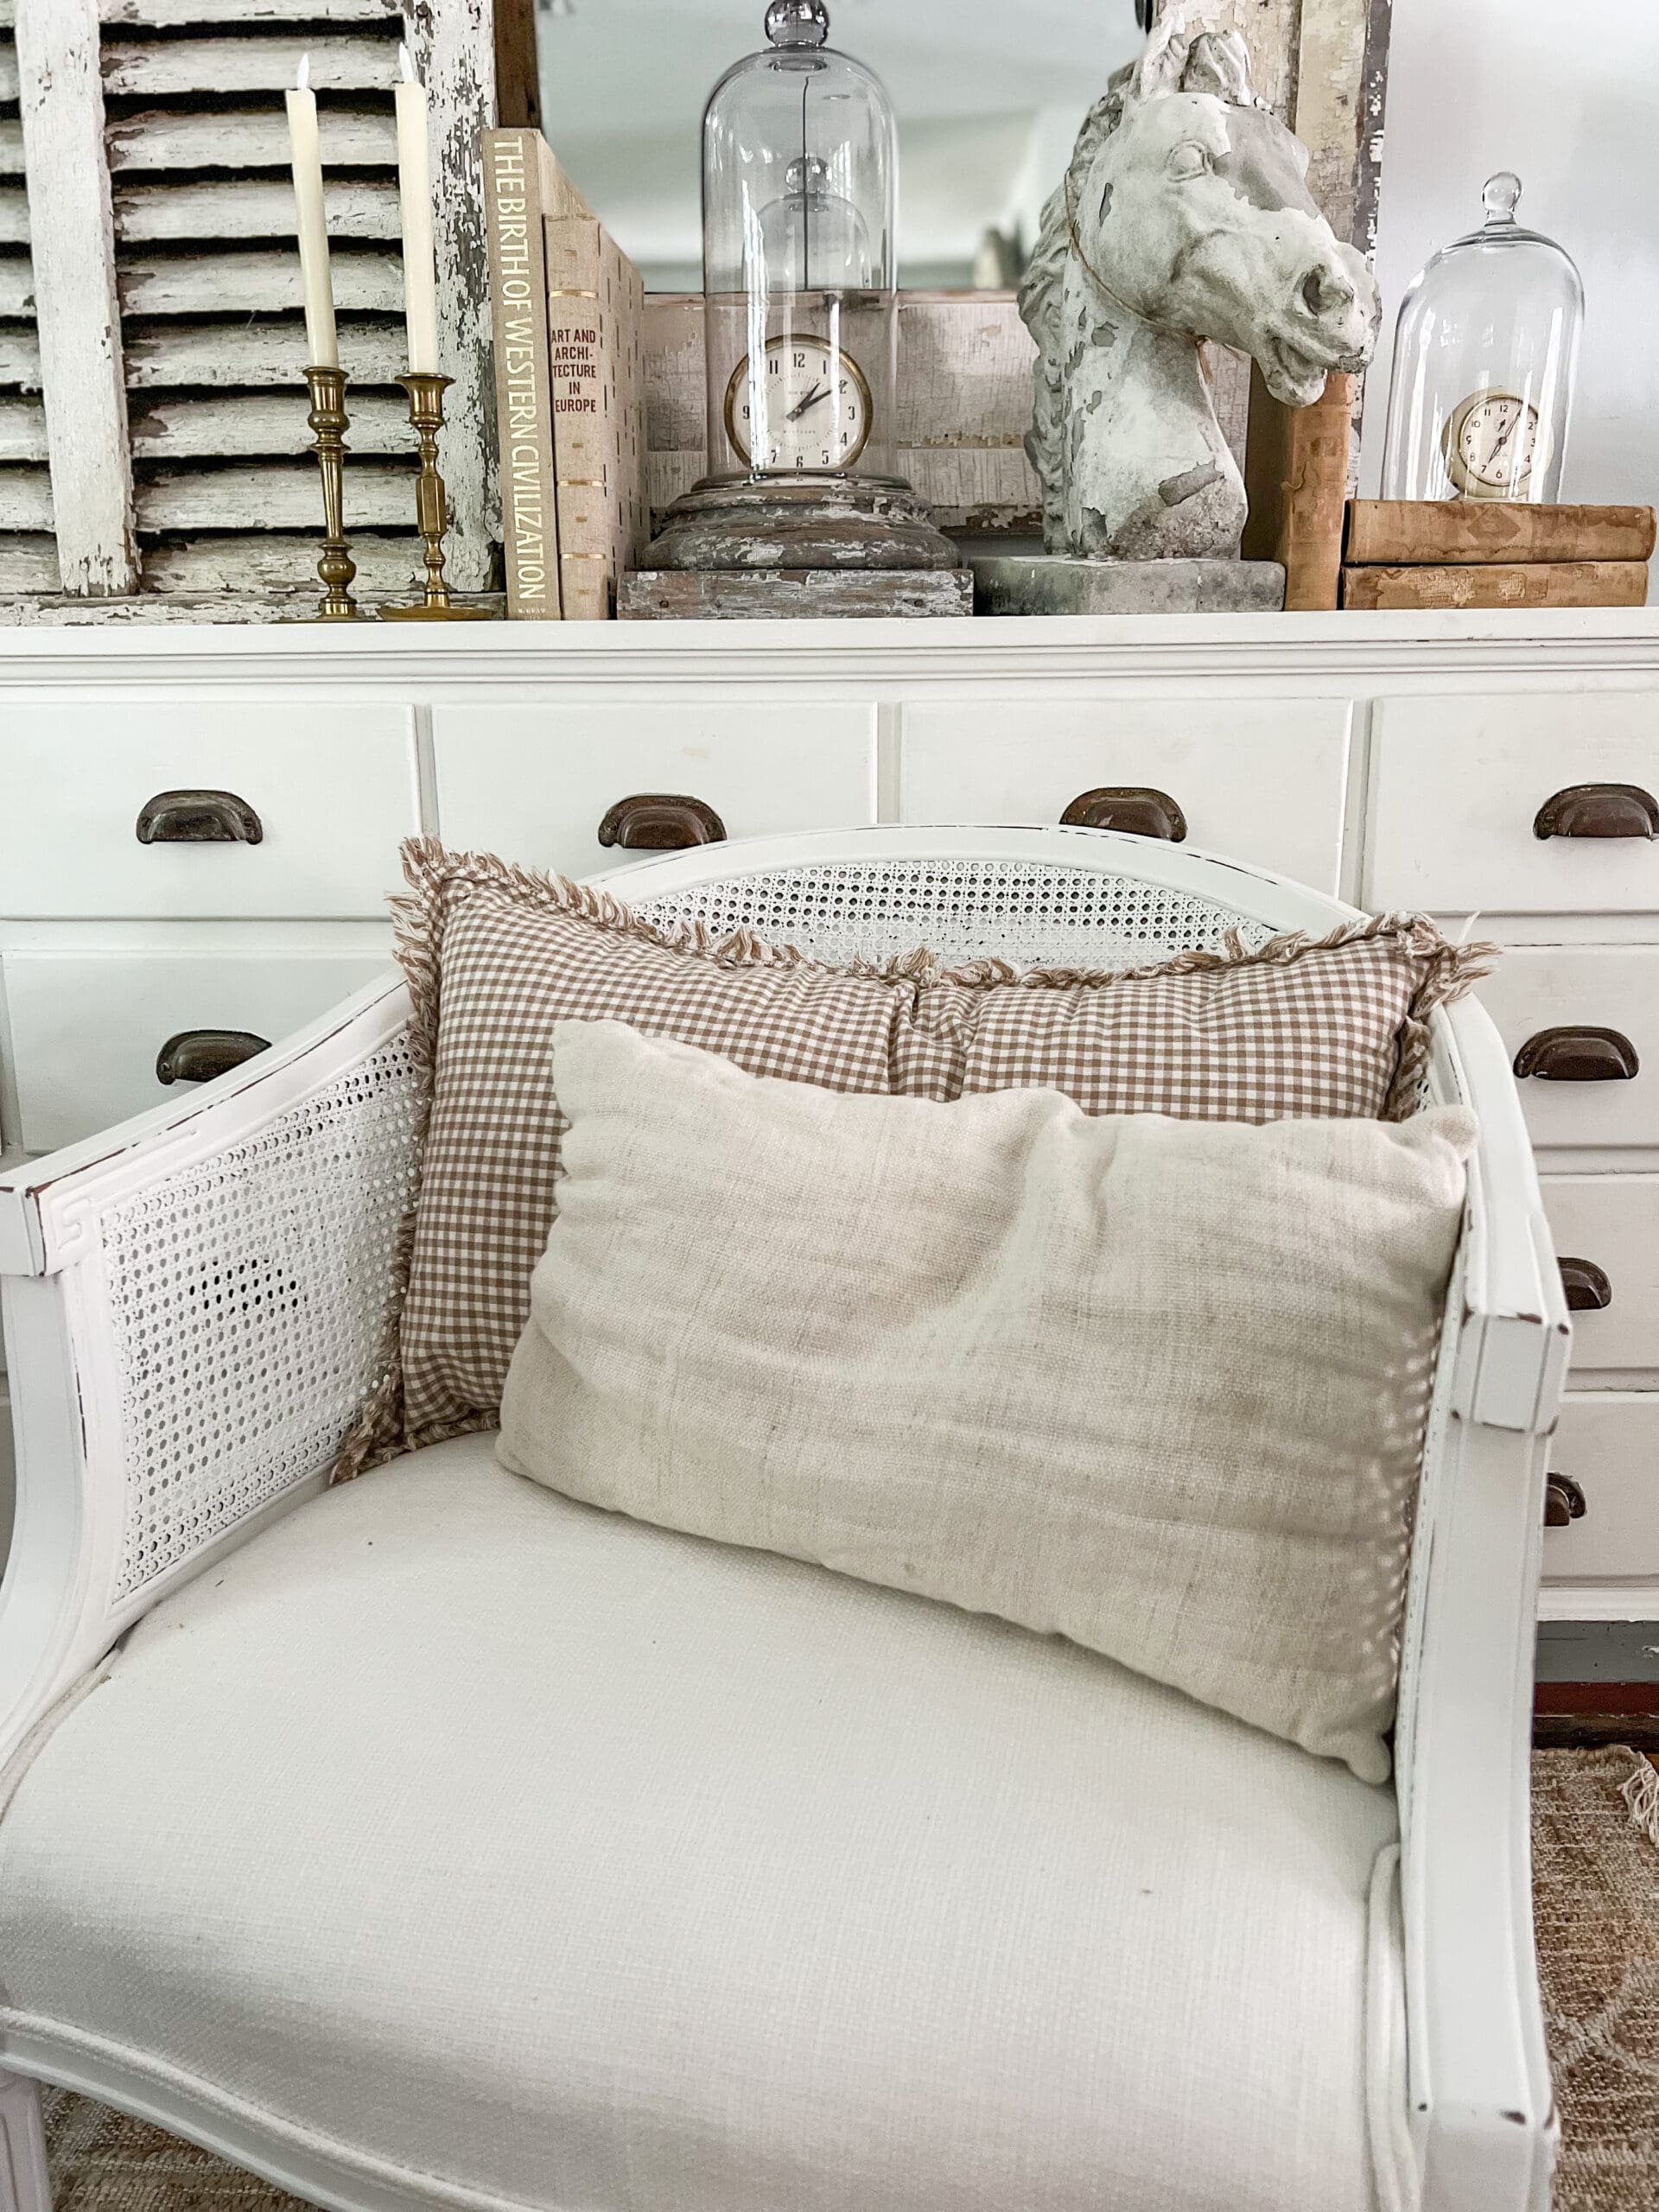 rectangular checked pillows on white chairs